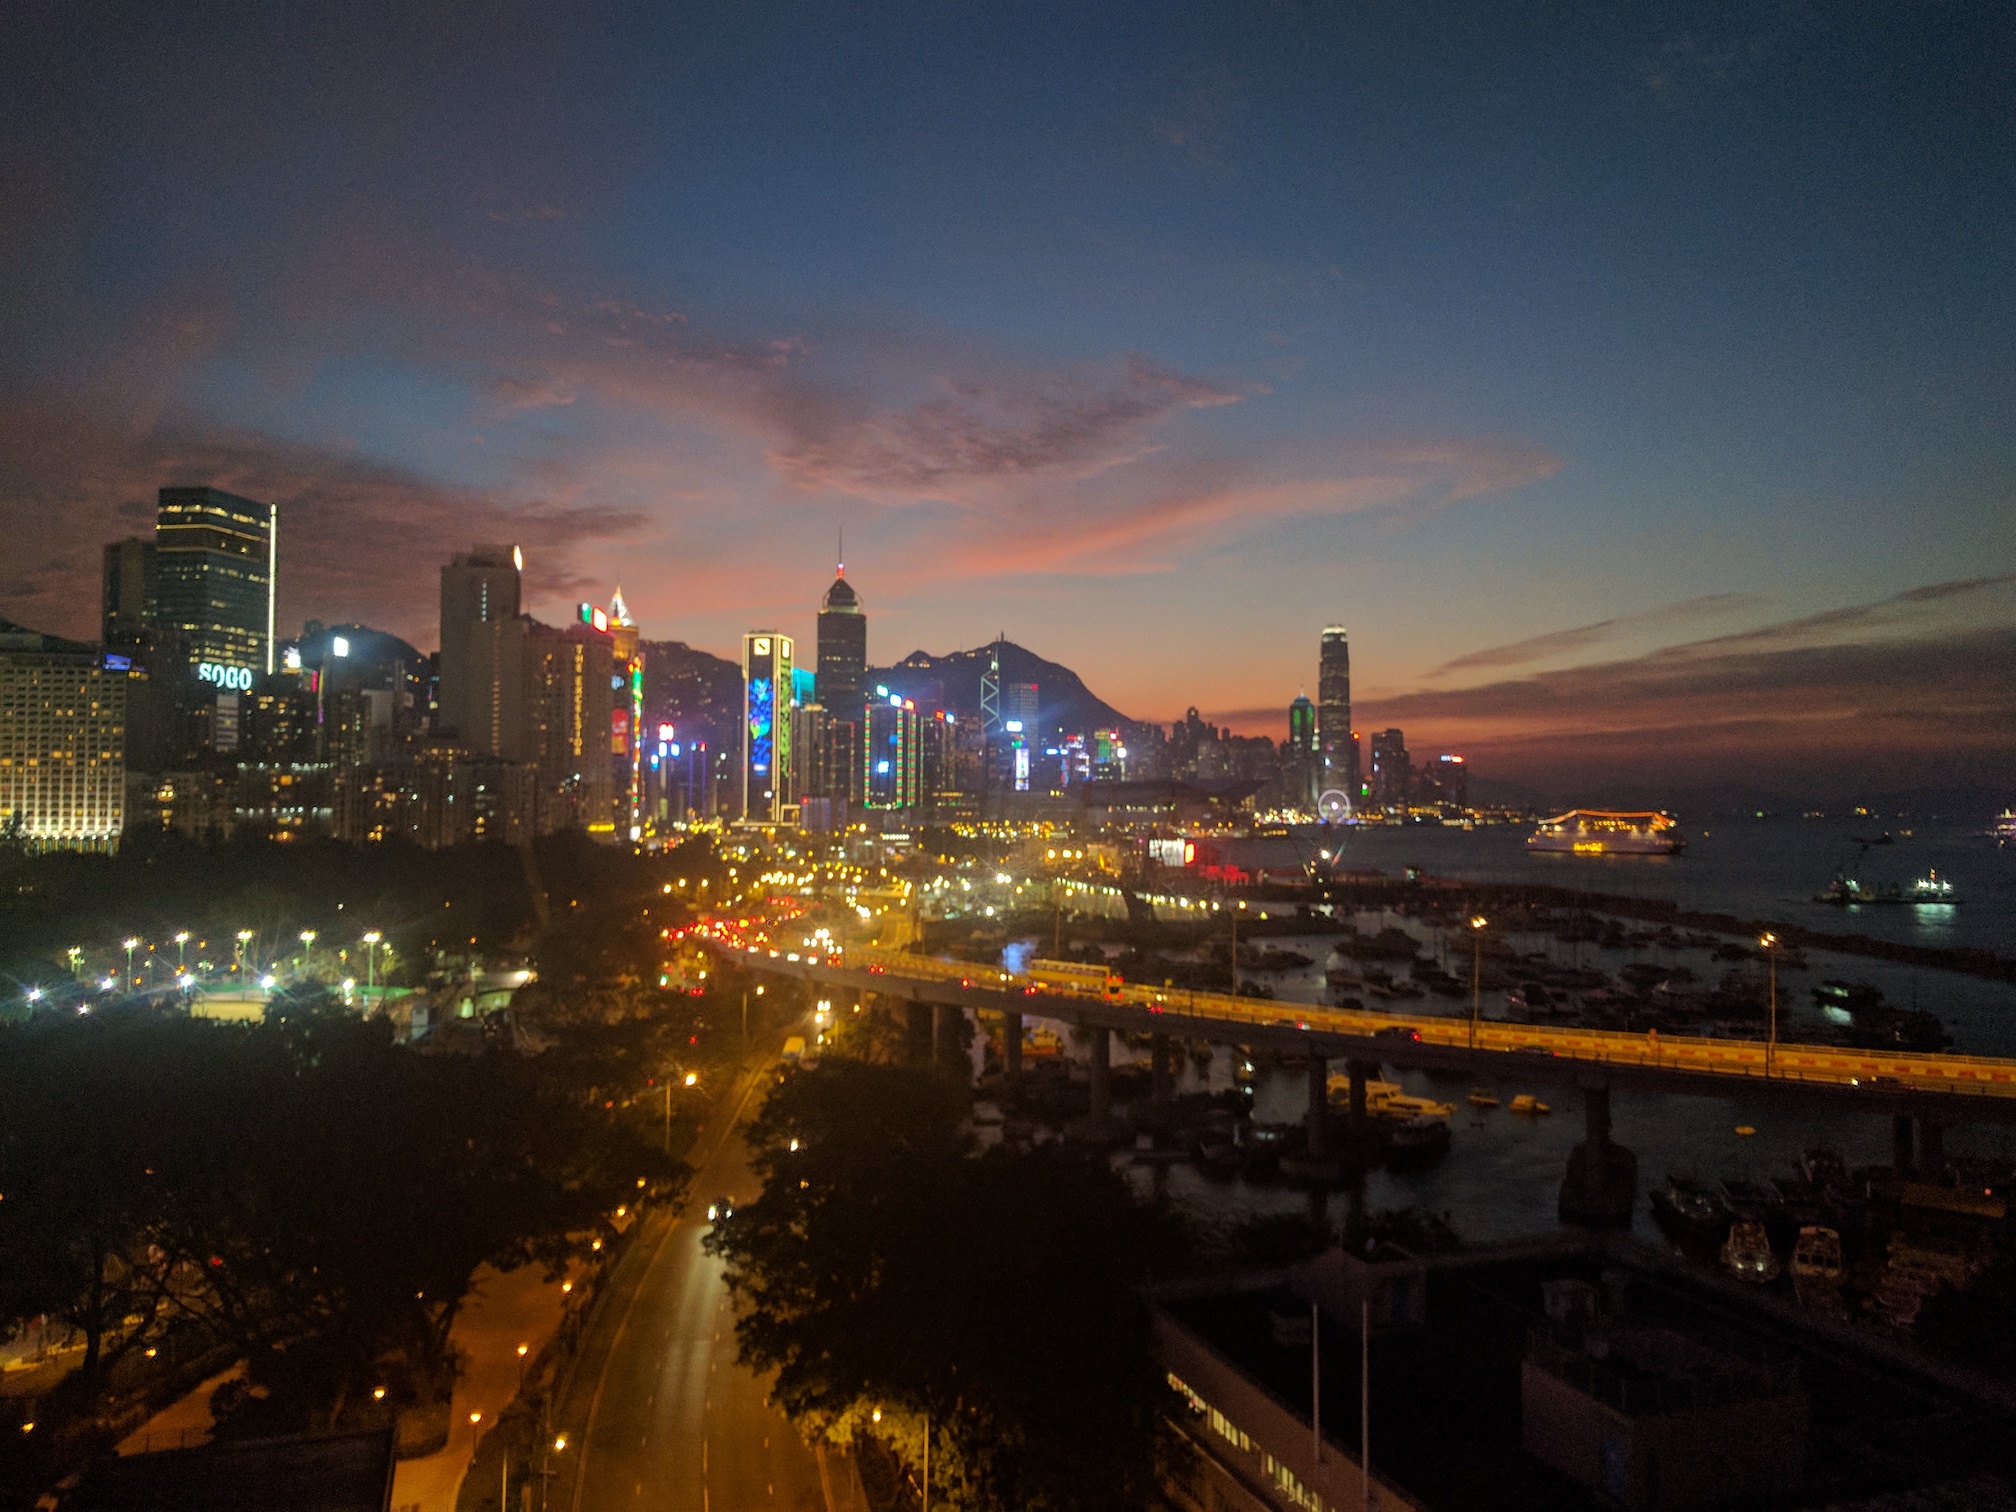 And as the sun fades the LEDs rise creating a beautiful Lightrise over Hong Kong Harbour